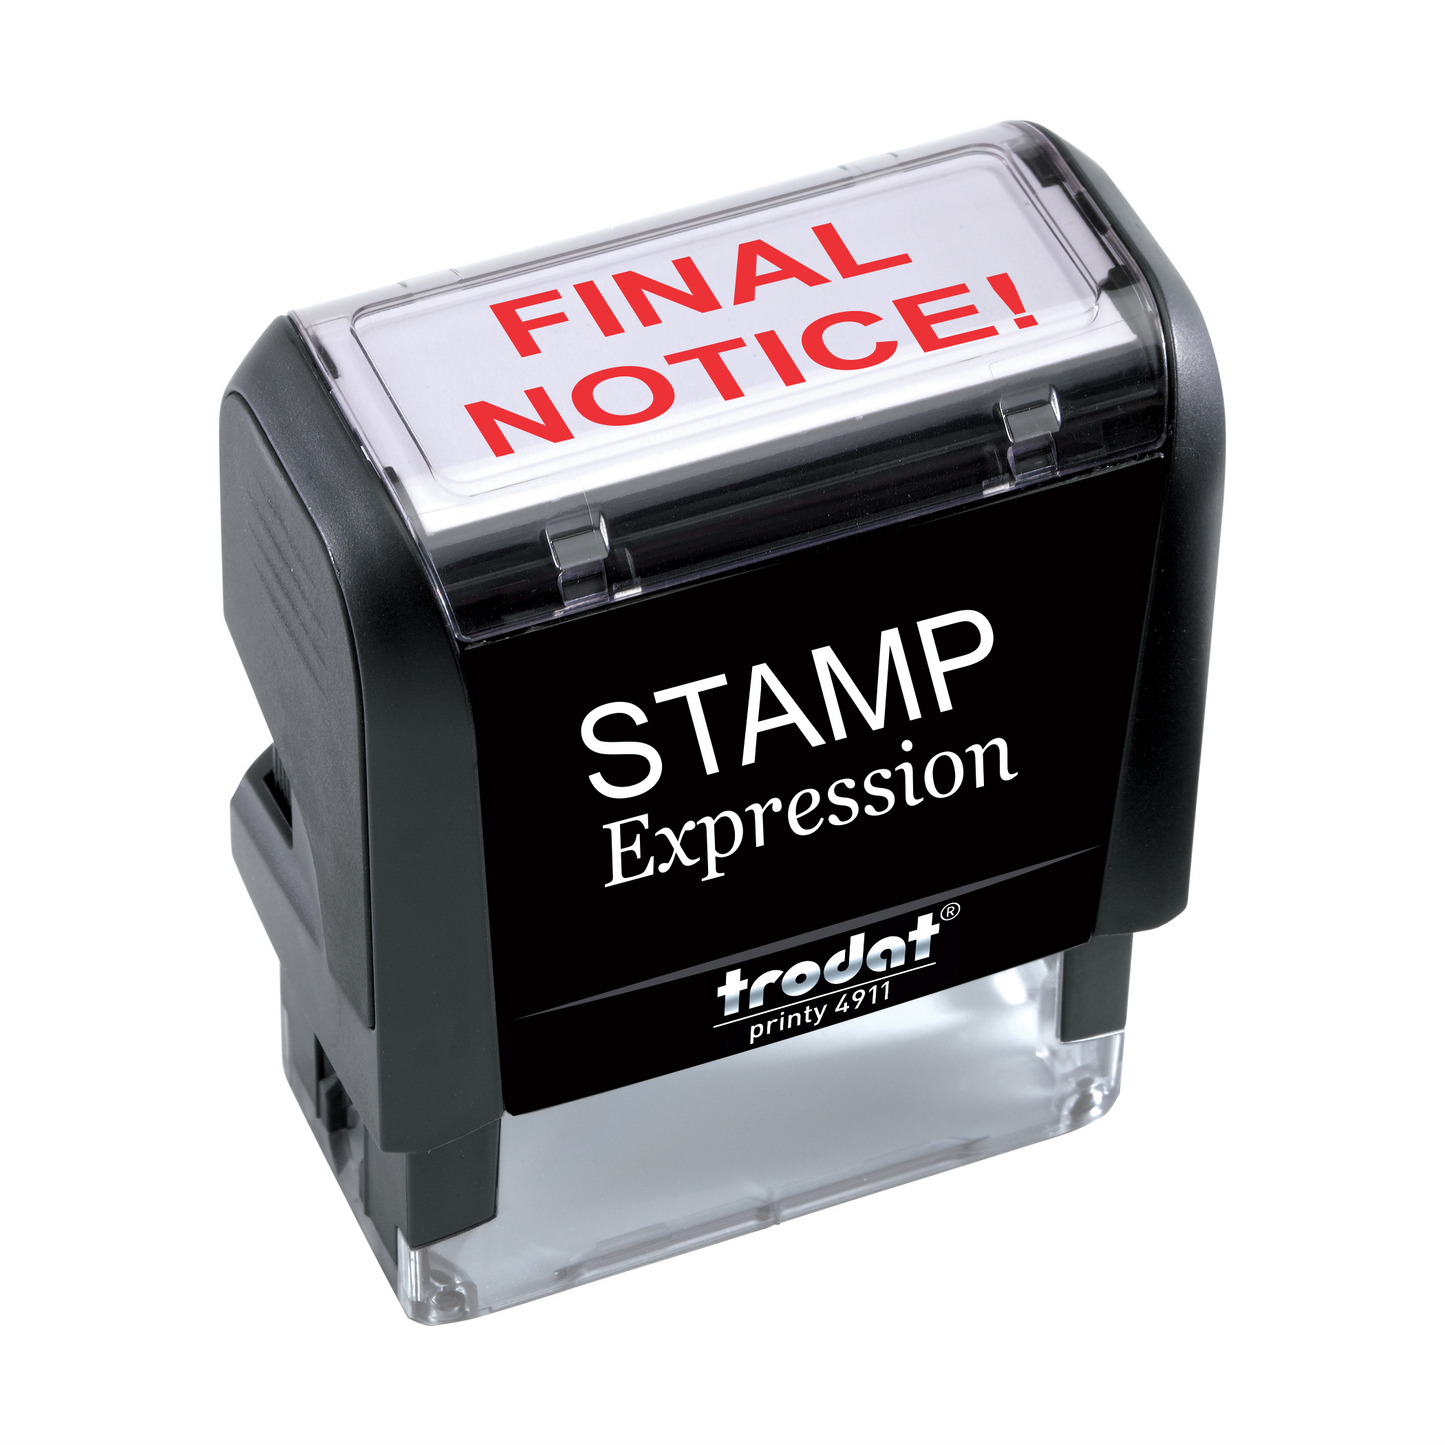 Final Notice! Two Lines Office Self Inking Rubber Stamp (SH-5296)